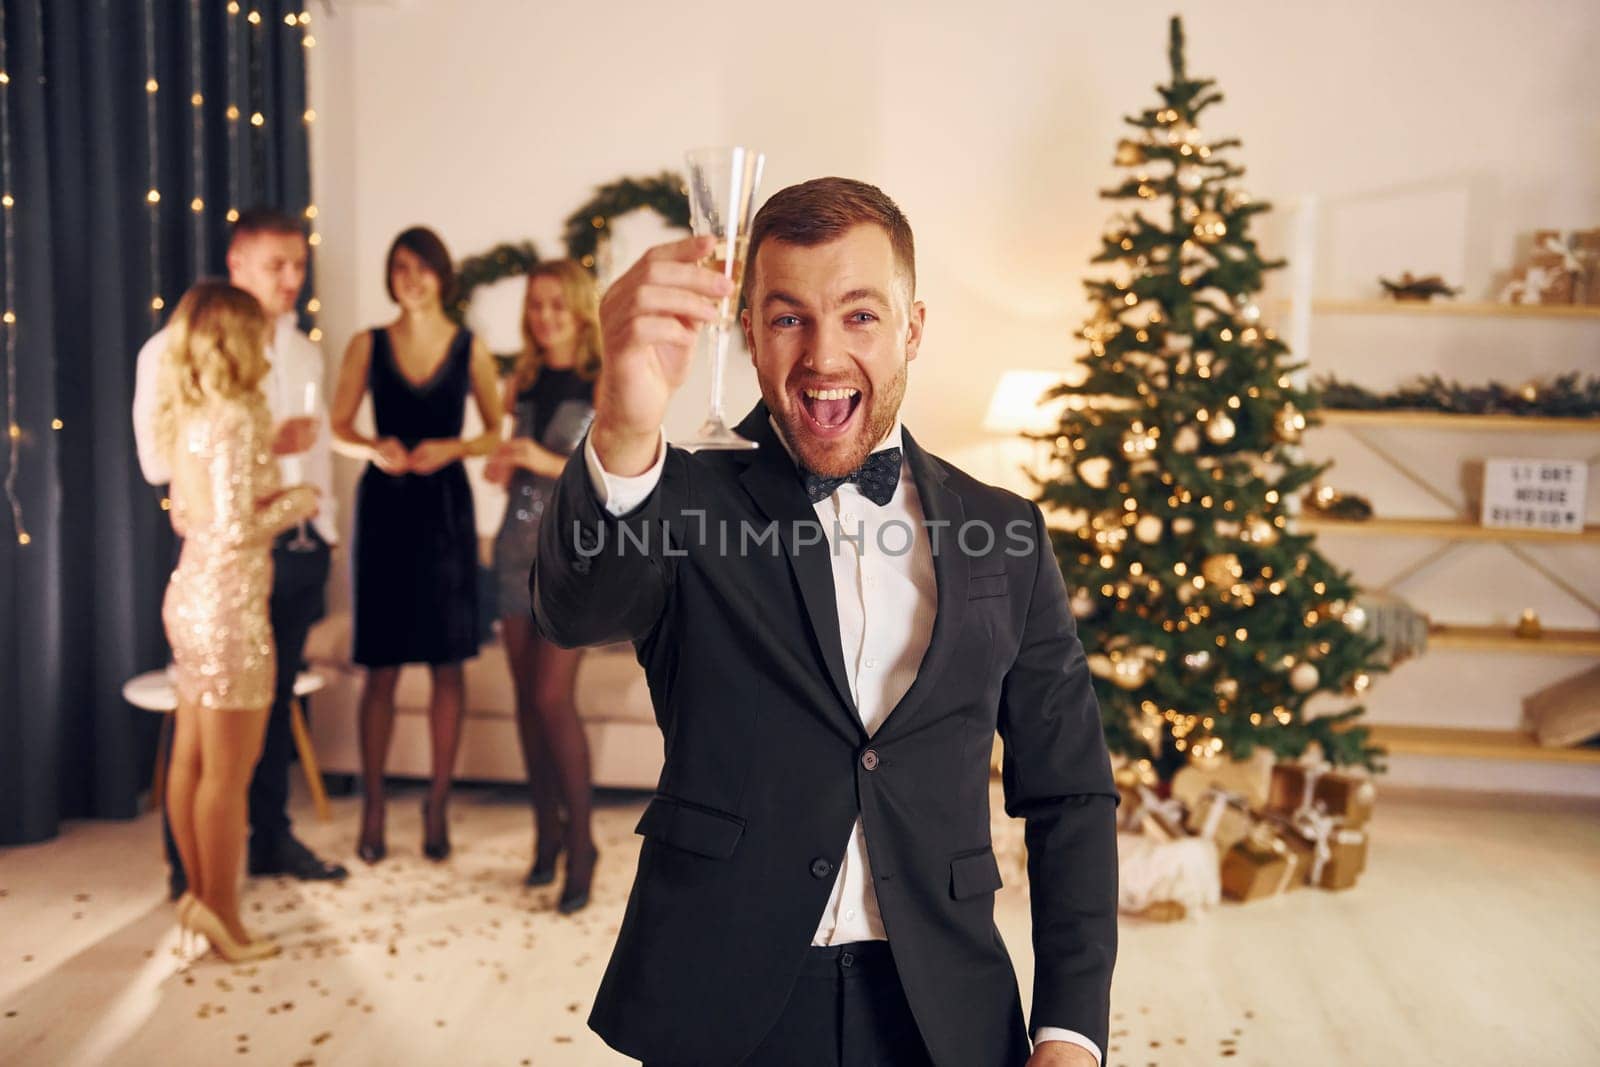 Man with glass of champagne is cheering. Group of people have a new year party indoors together.